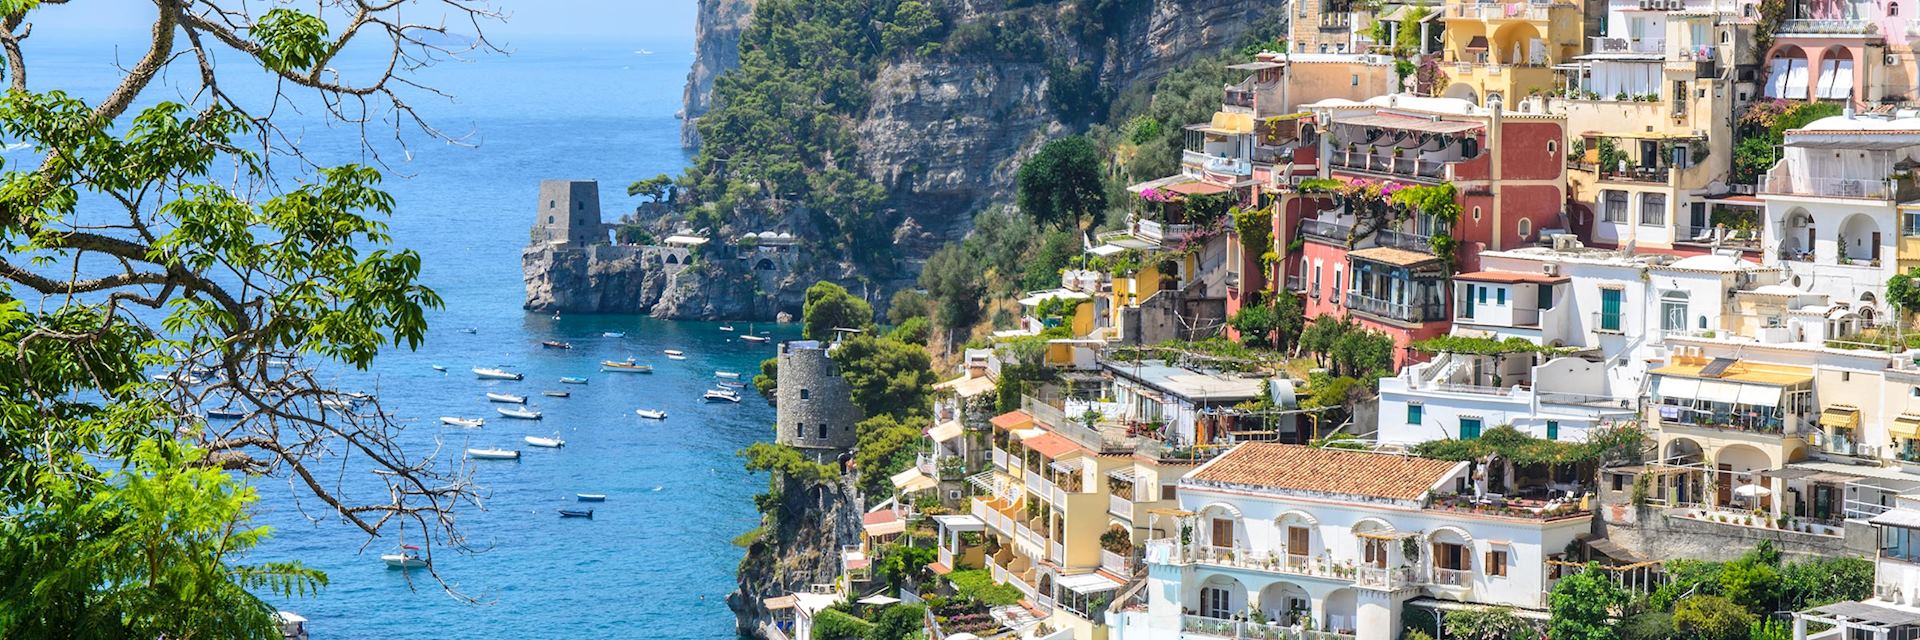 Guide to exploring the Amalfi Coast and | Audley Travel